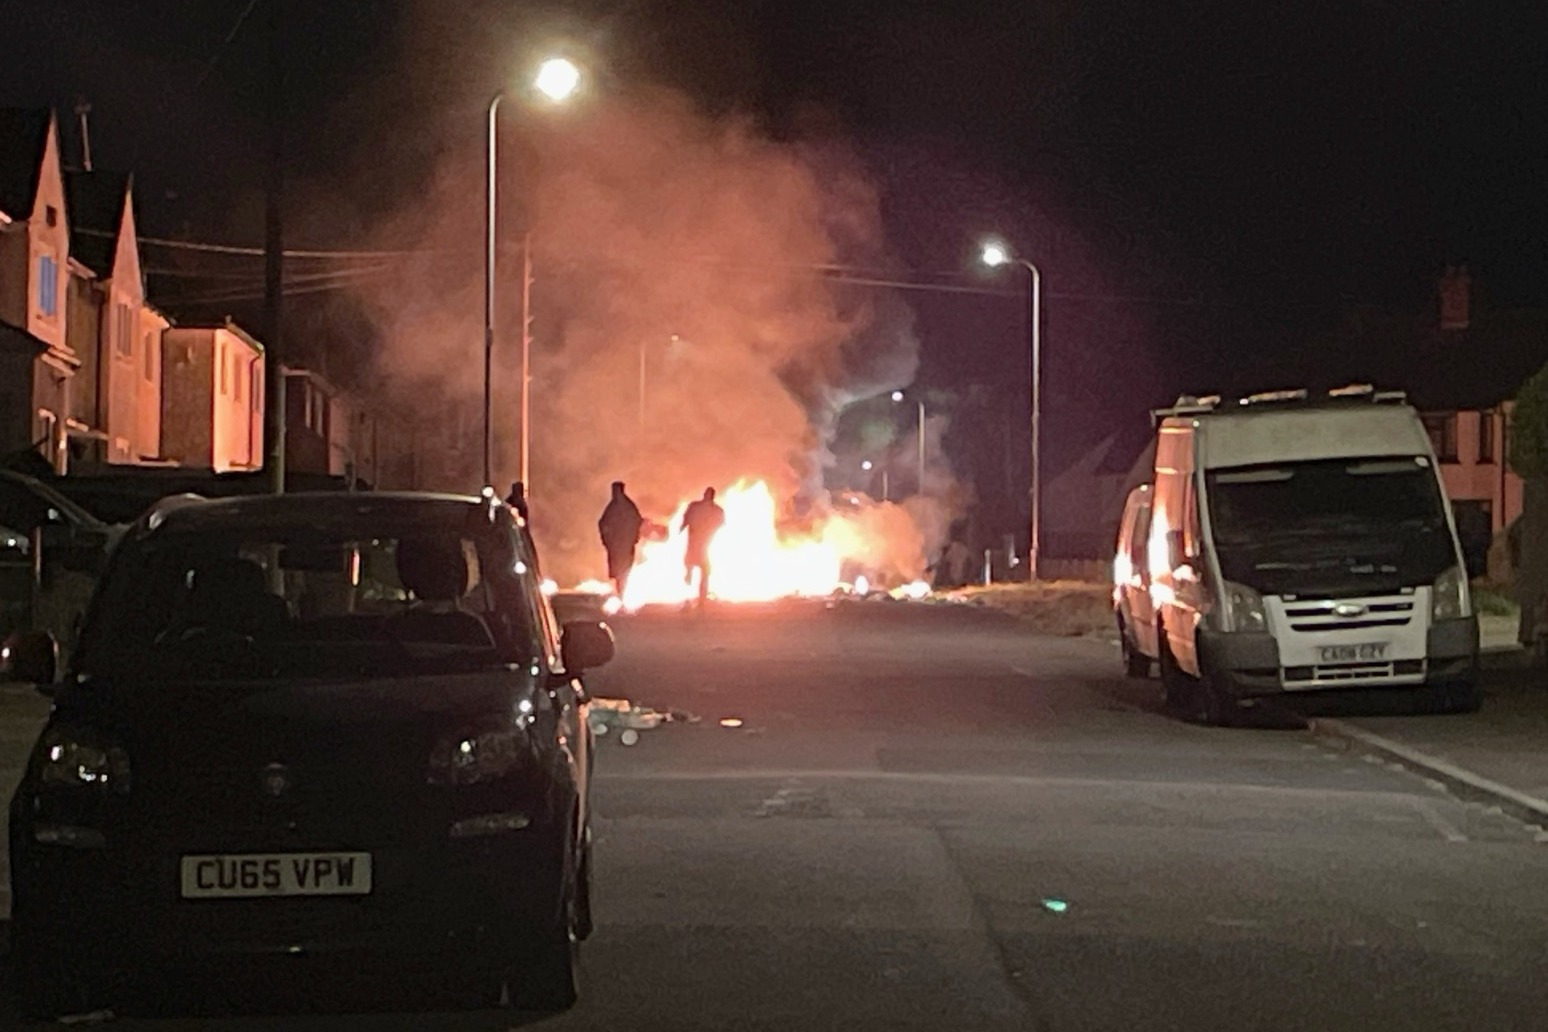 ‘Rumours after deaths of two teenagers in crash sparked Cardiff riot’ 